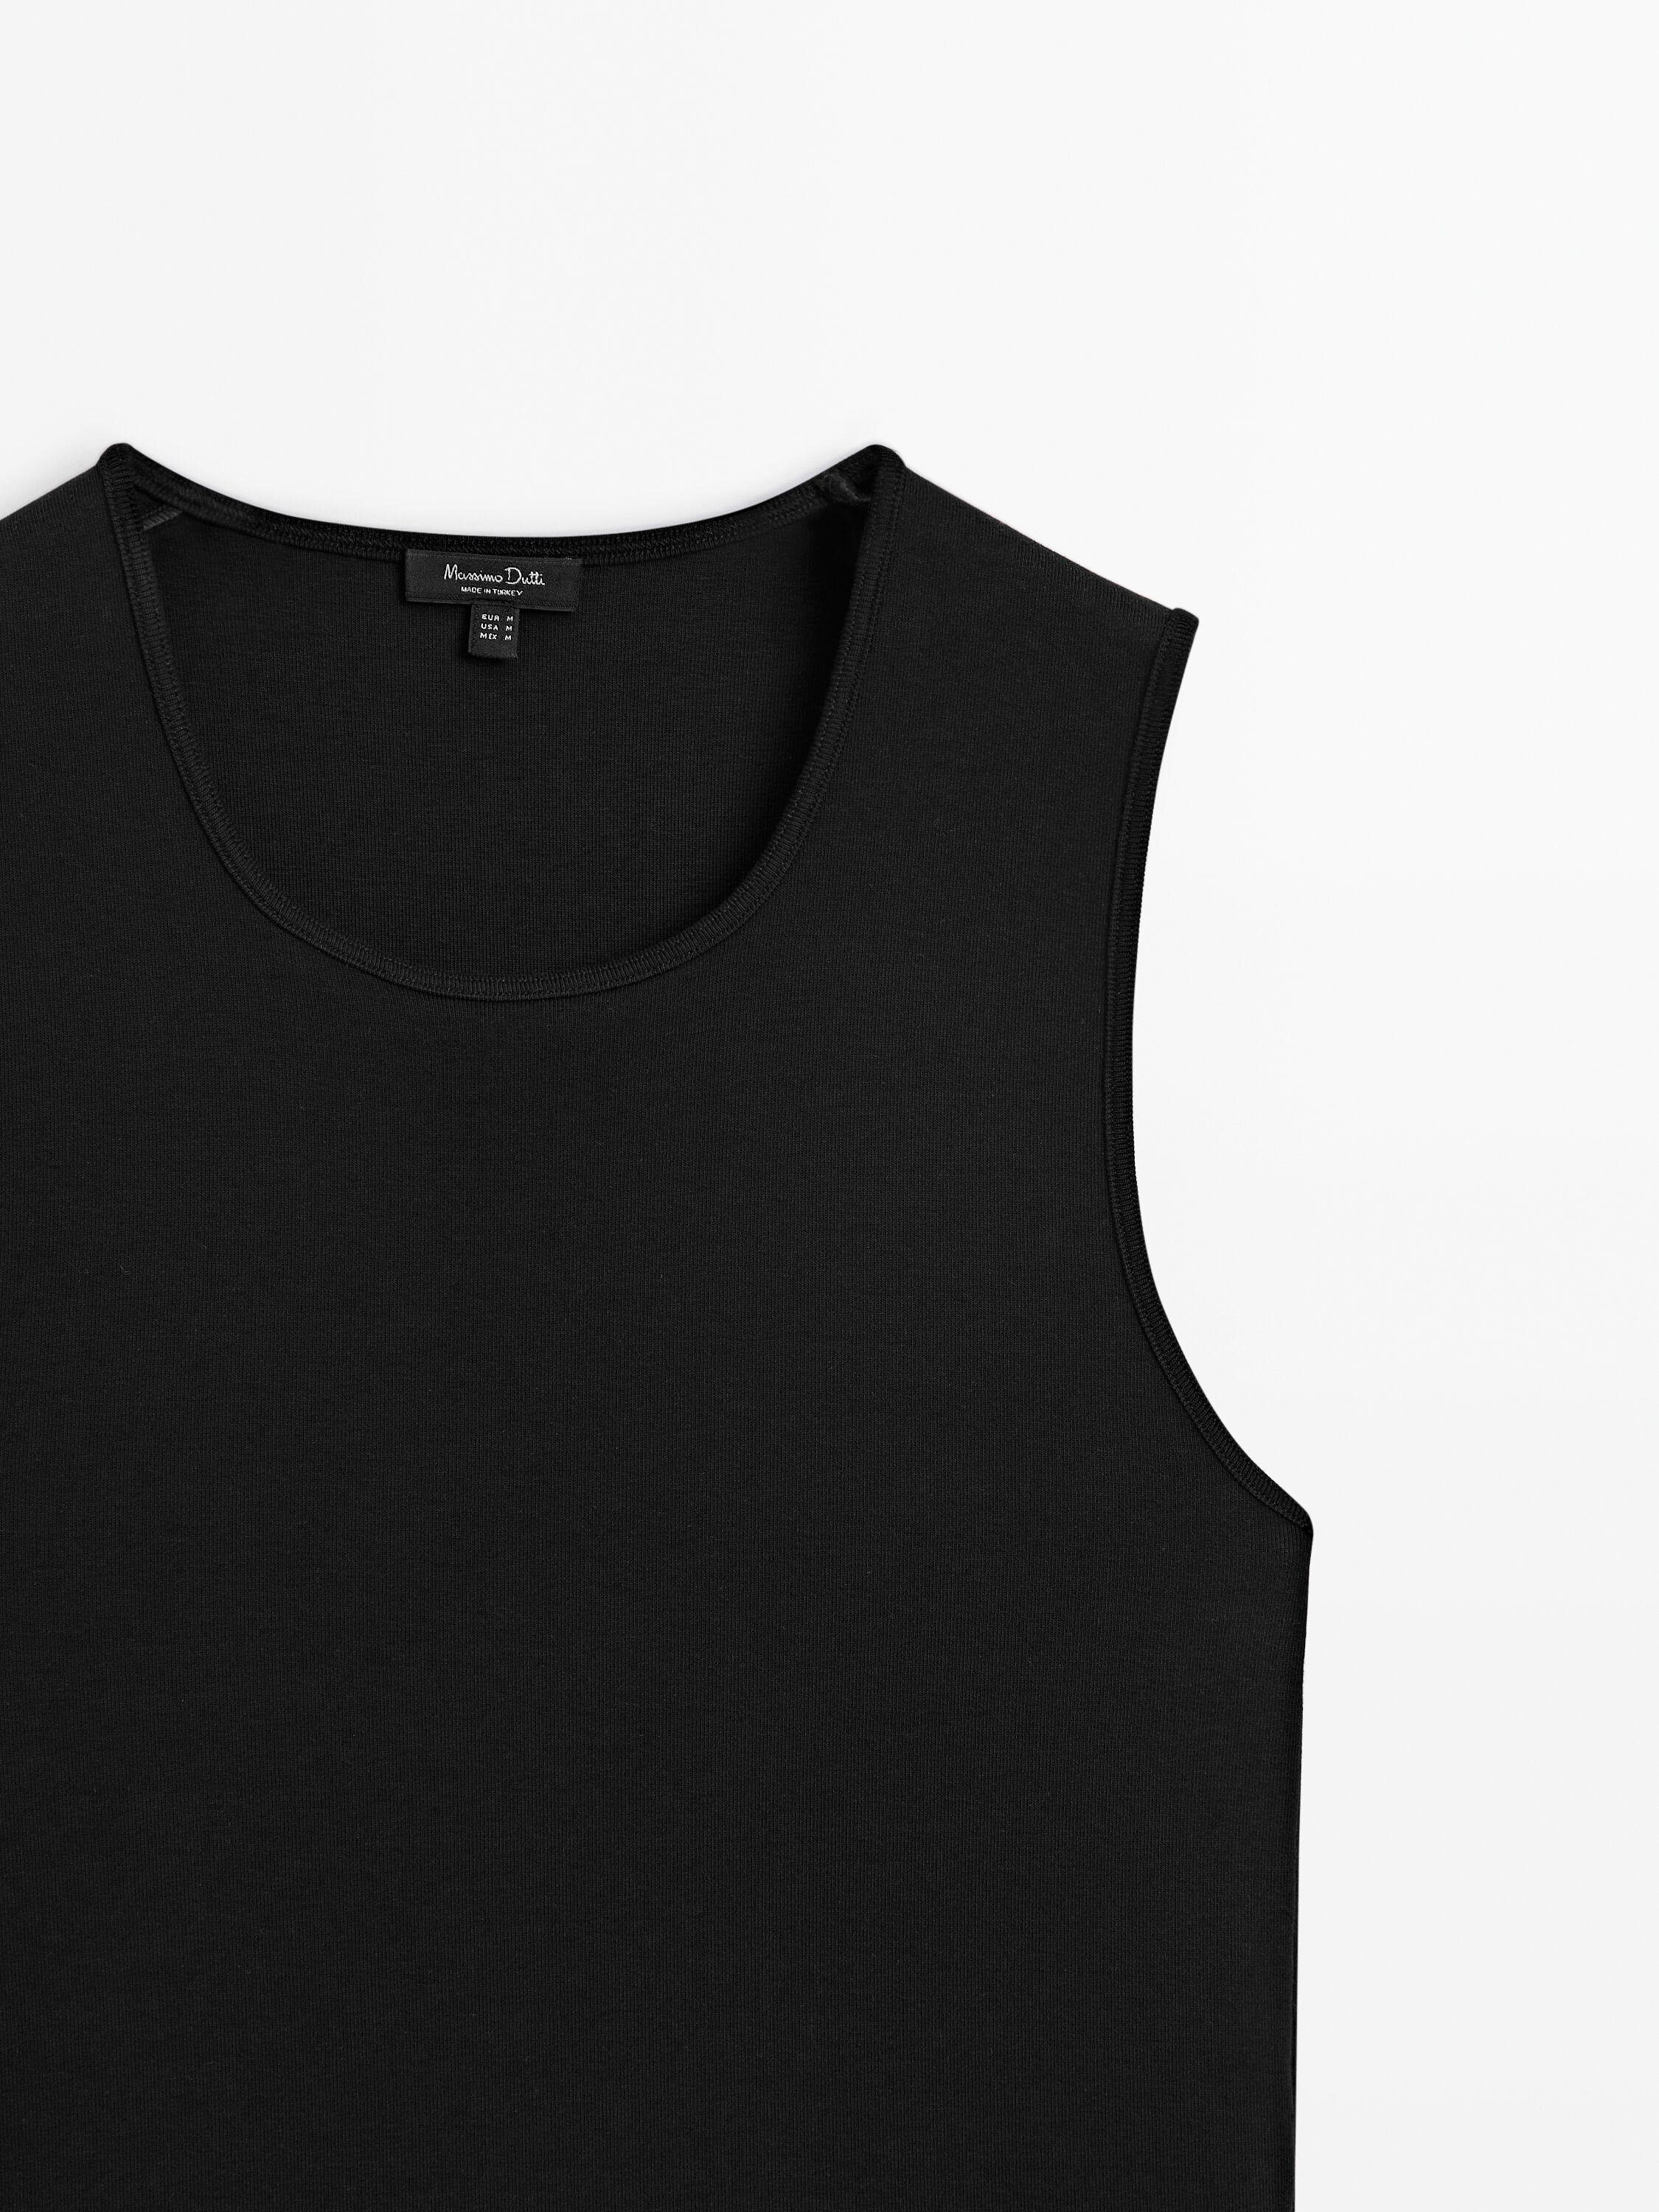 Fitted cotton blend tank top